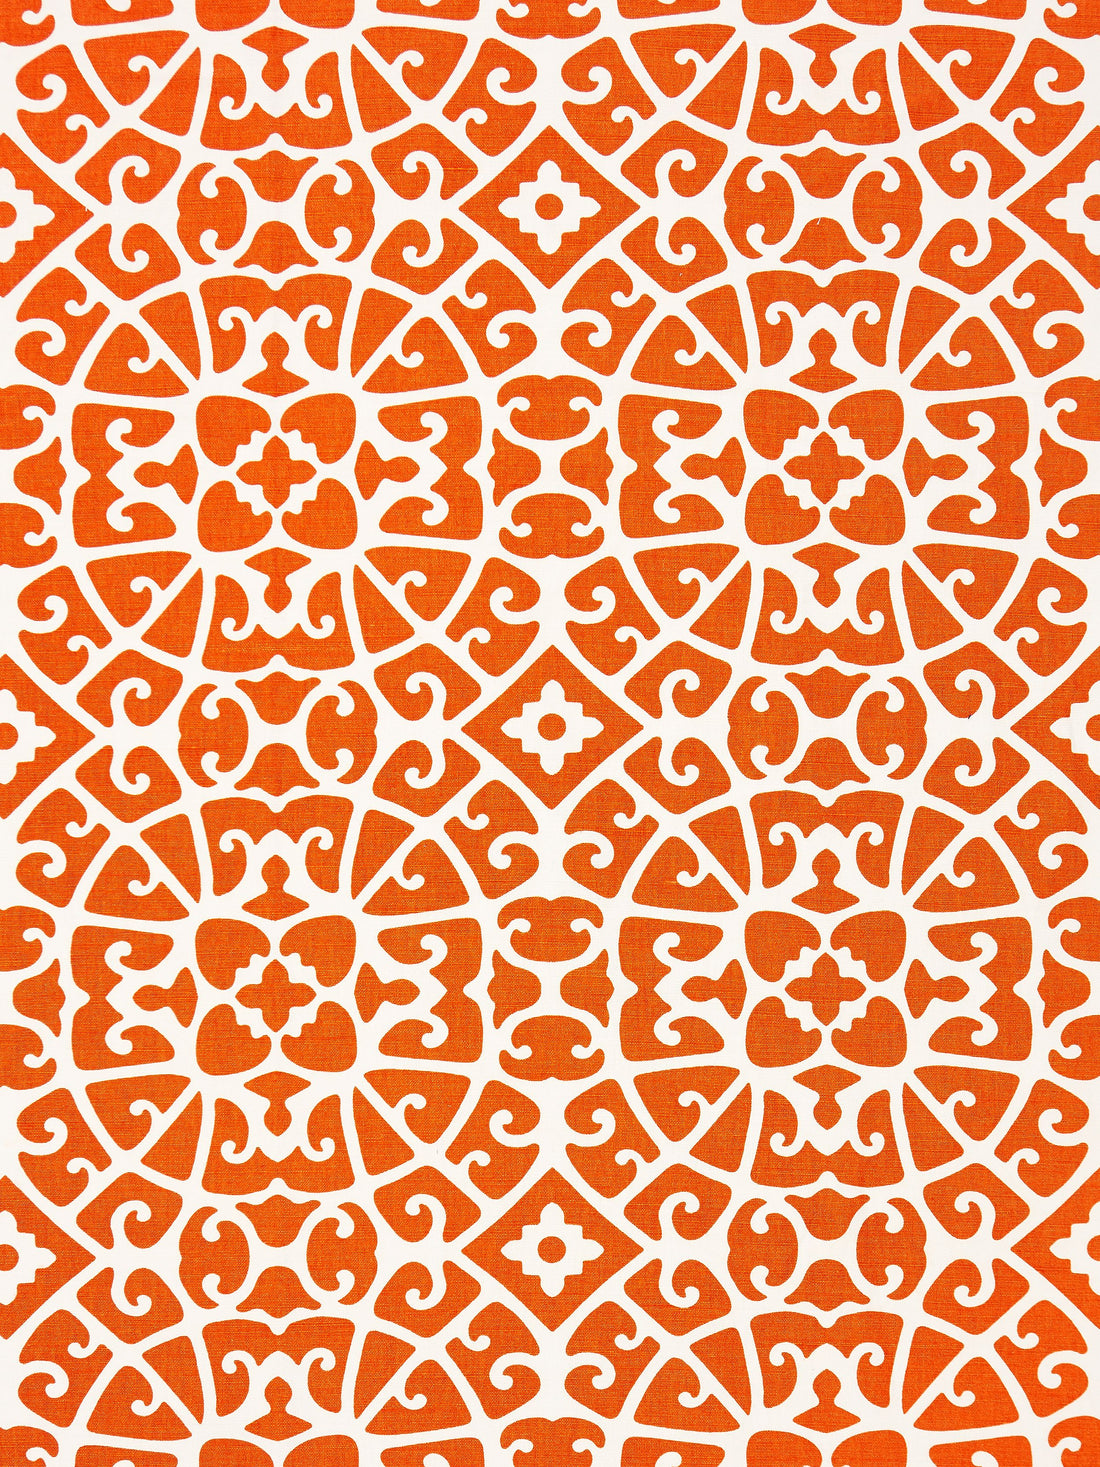 Anshun Lattice fabric in persimmon color - pattern number SC 000416559 - by Scalamandre in the Scalamandre Fabrics Book 1 collection